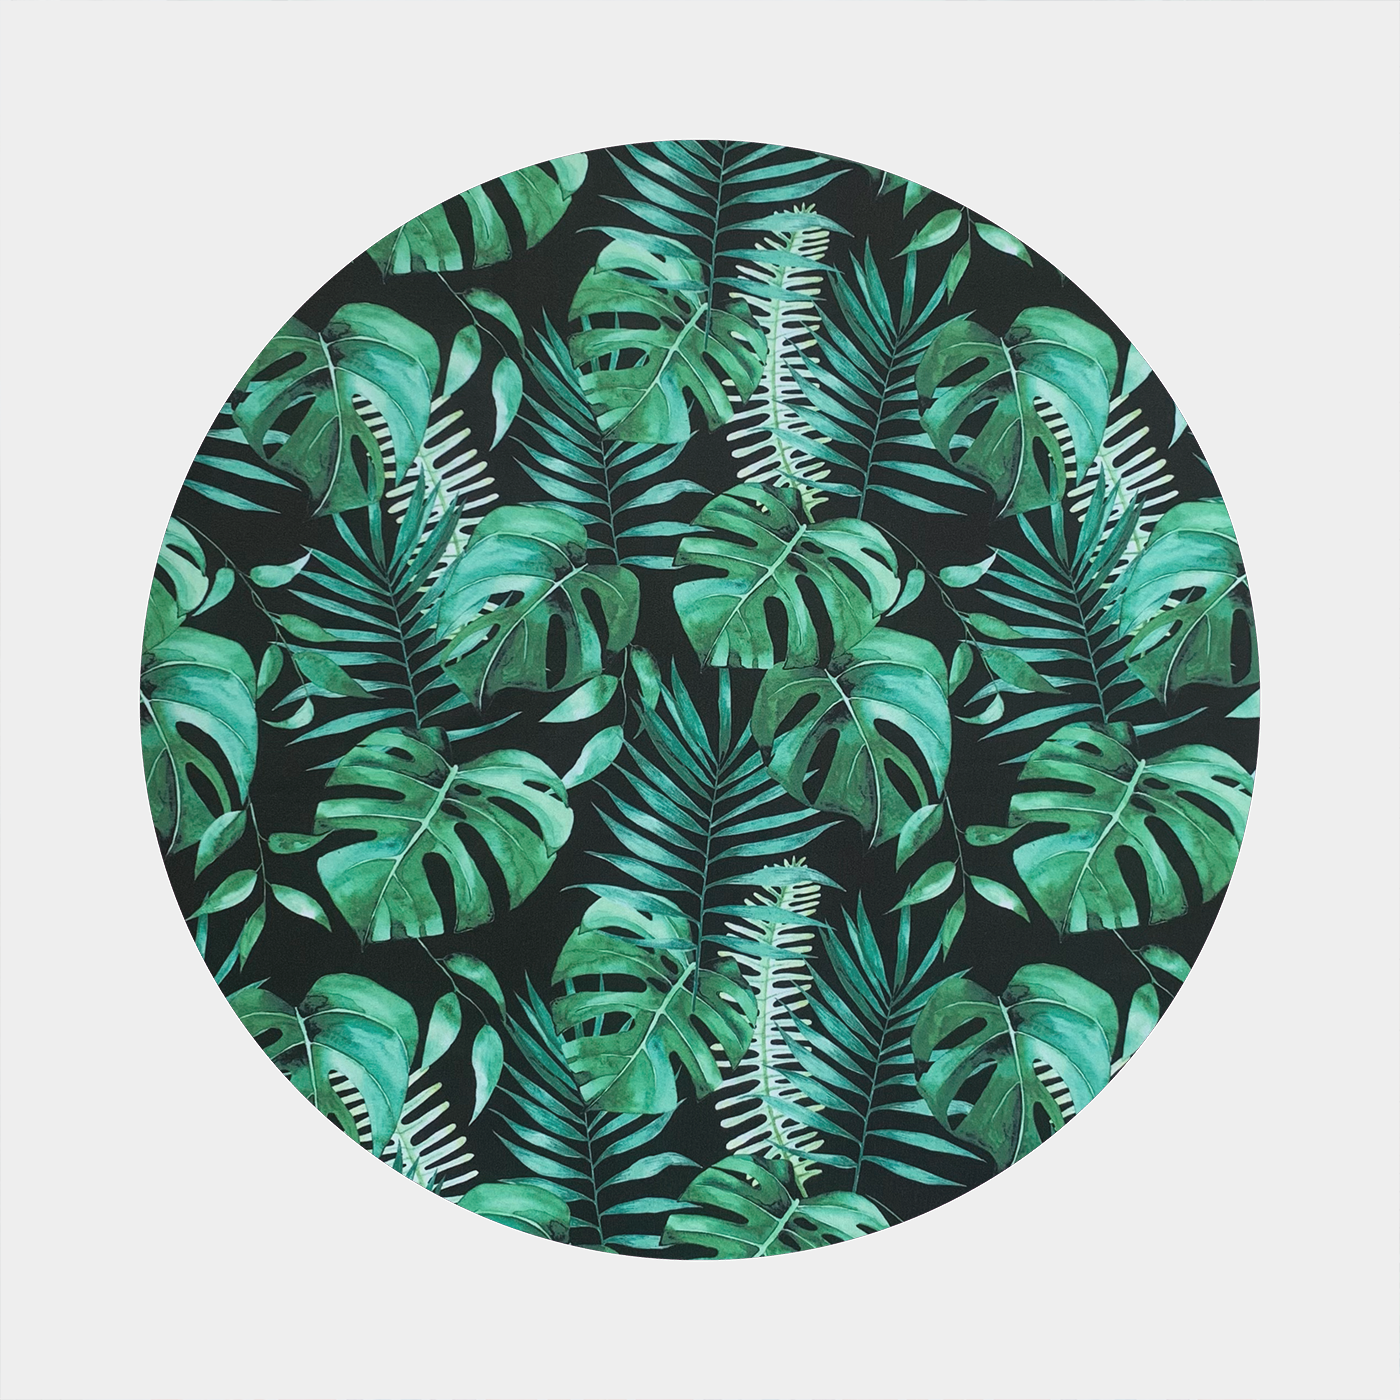 Pattern with black background and large green leaves and ferns